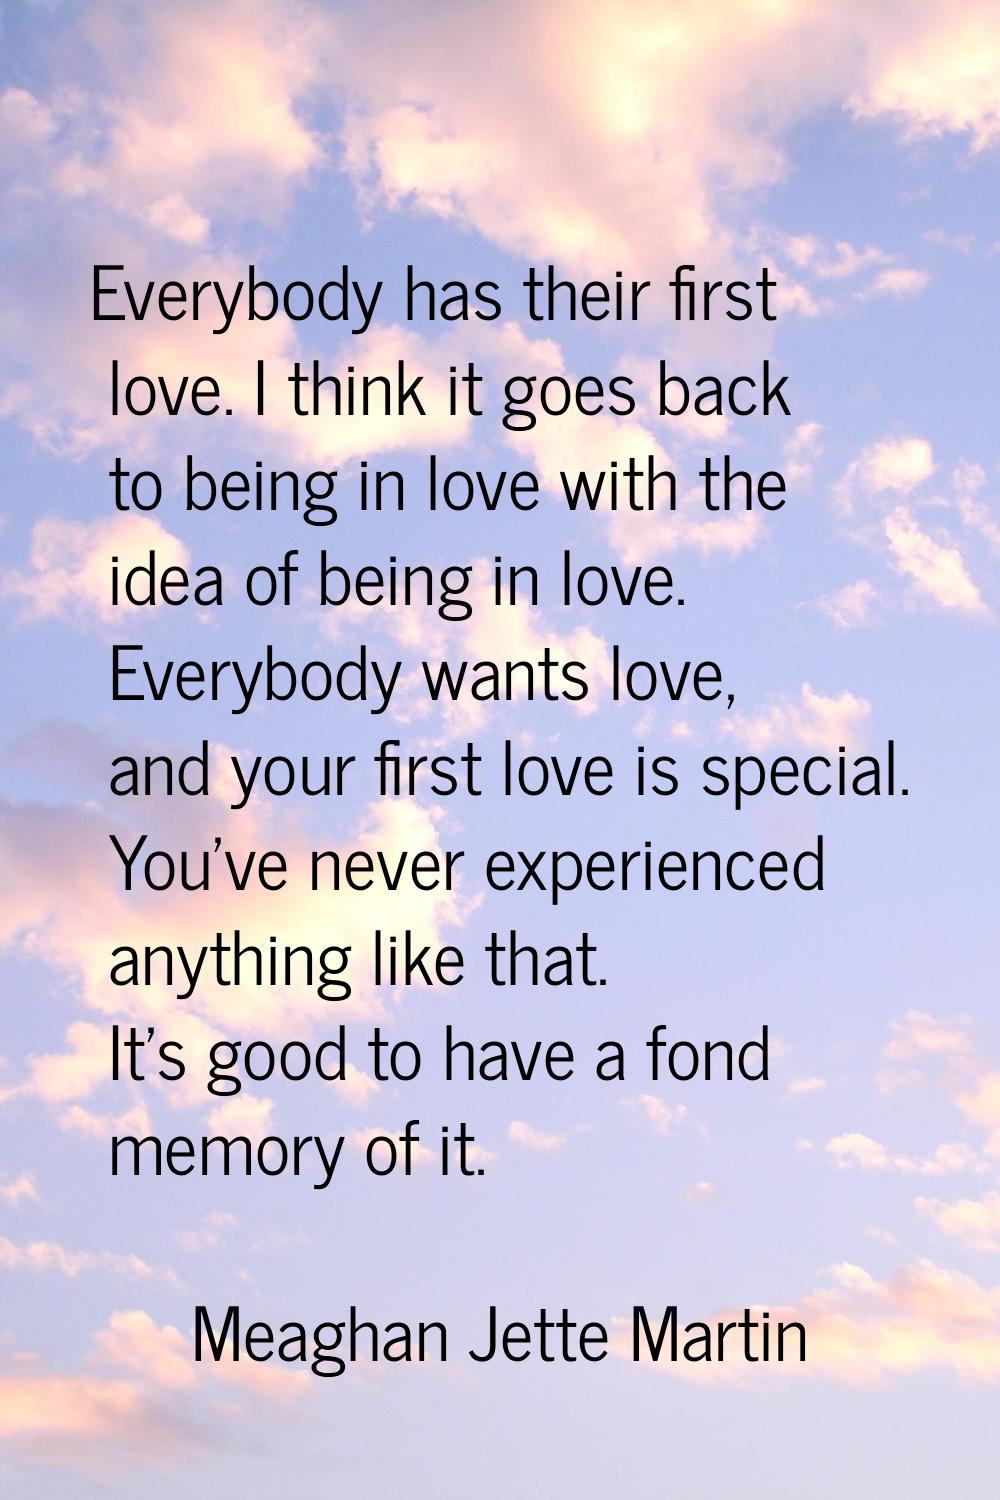 Everybody has their first love. I think it goes back to being in love with the idea of being in lov